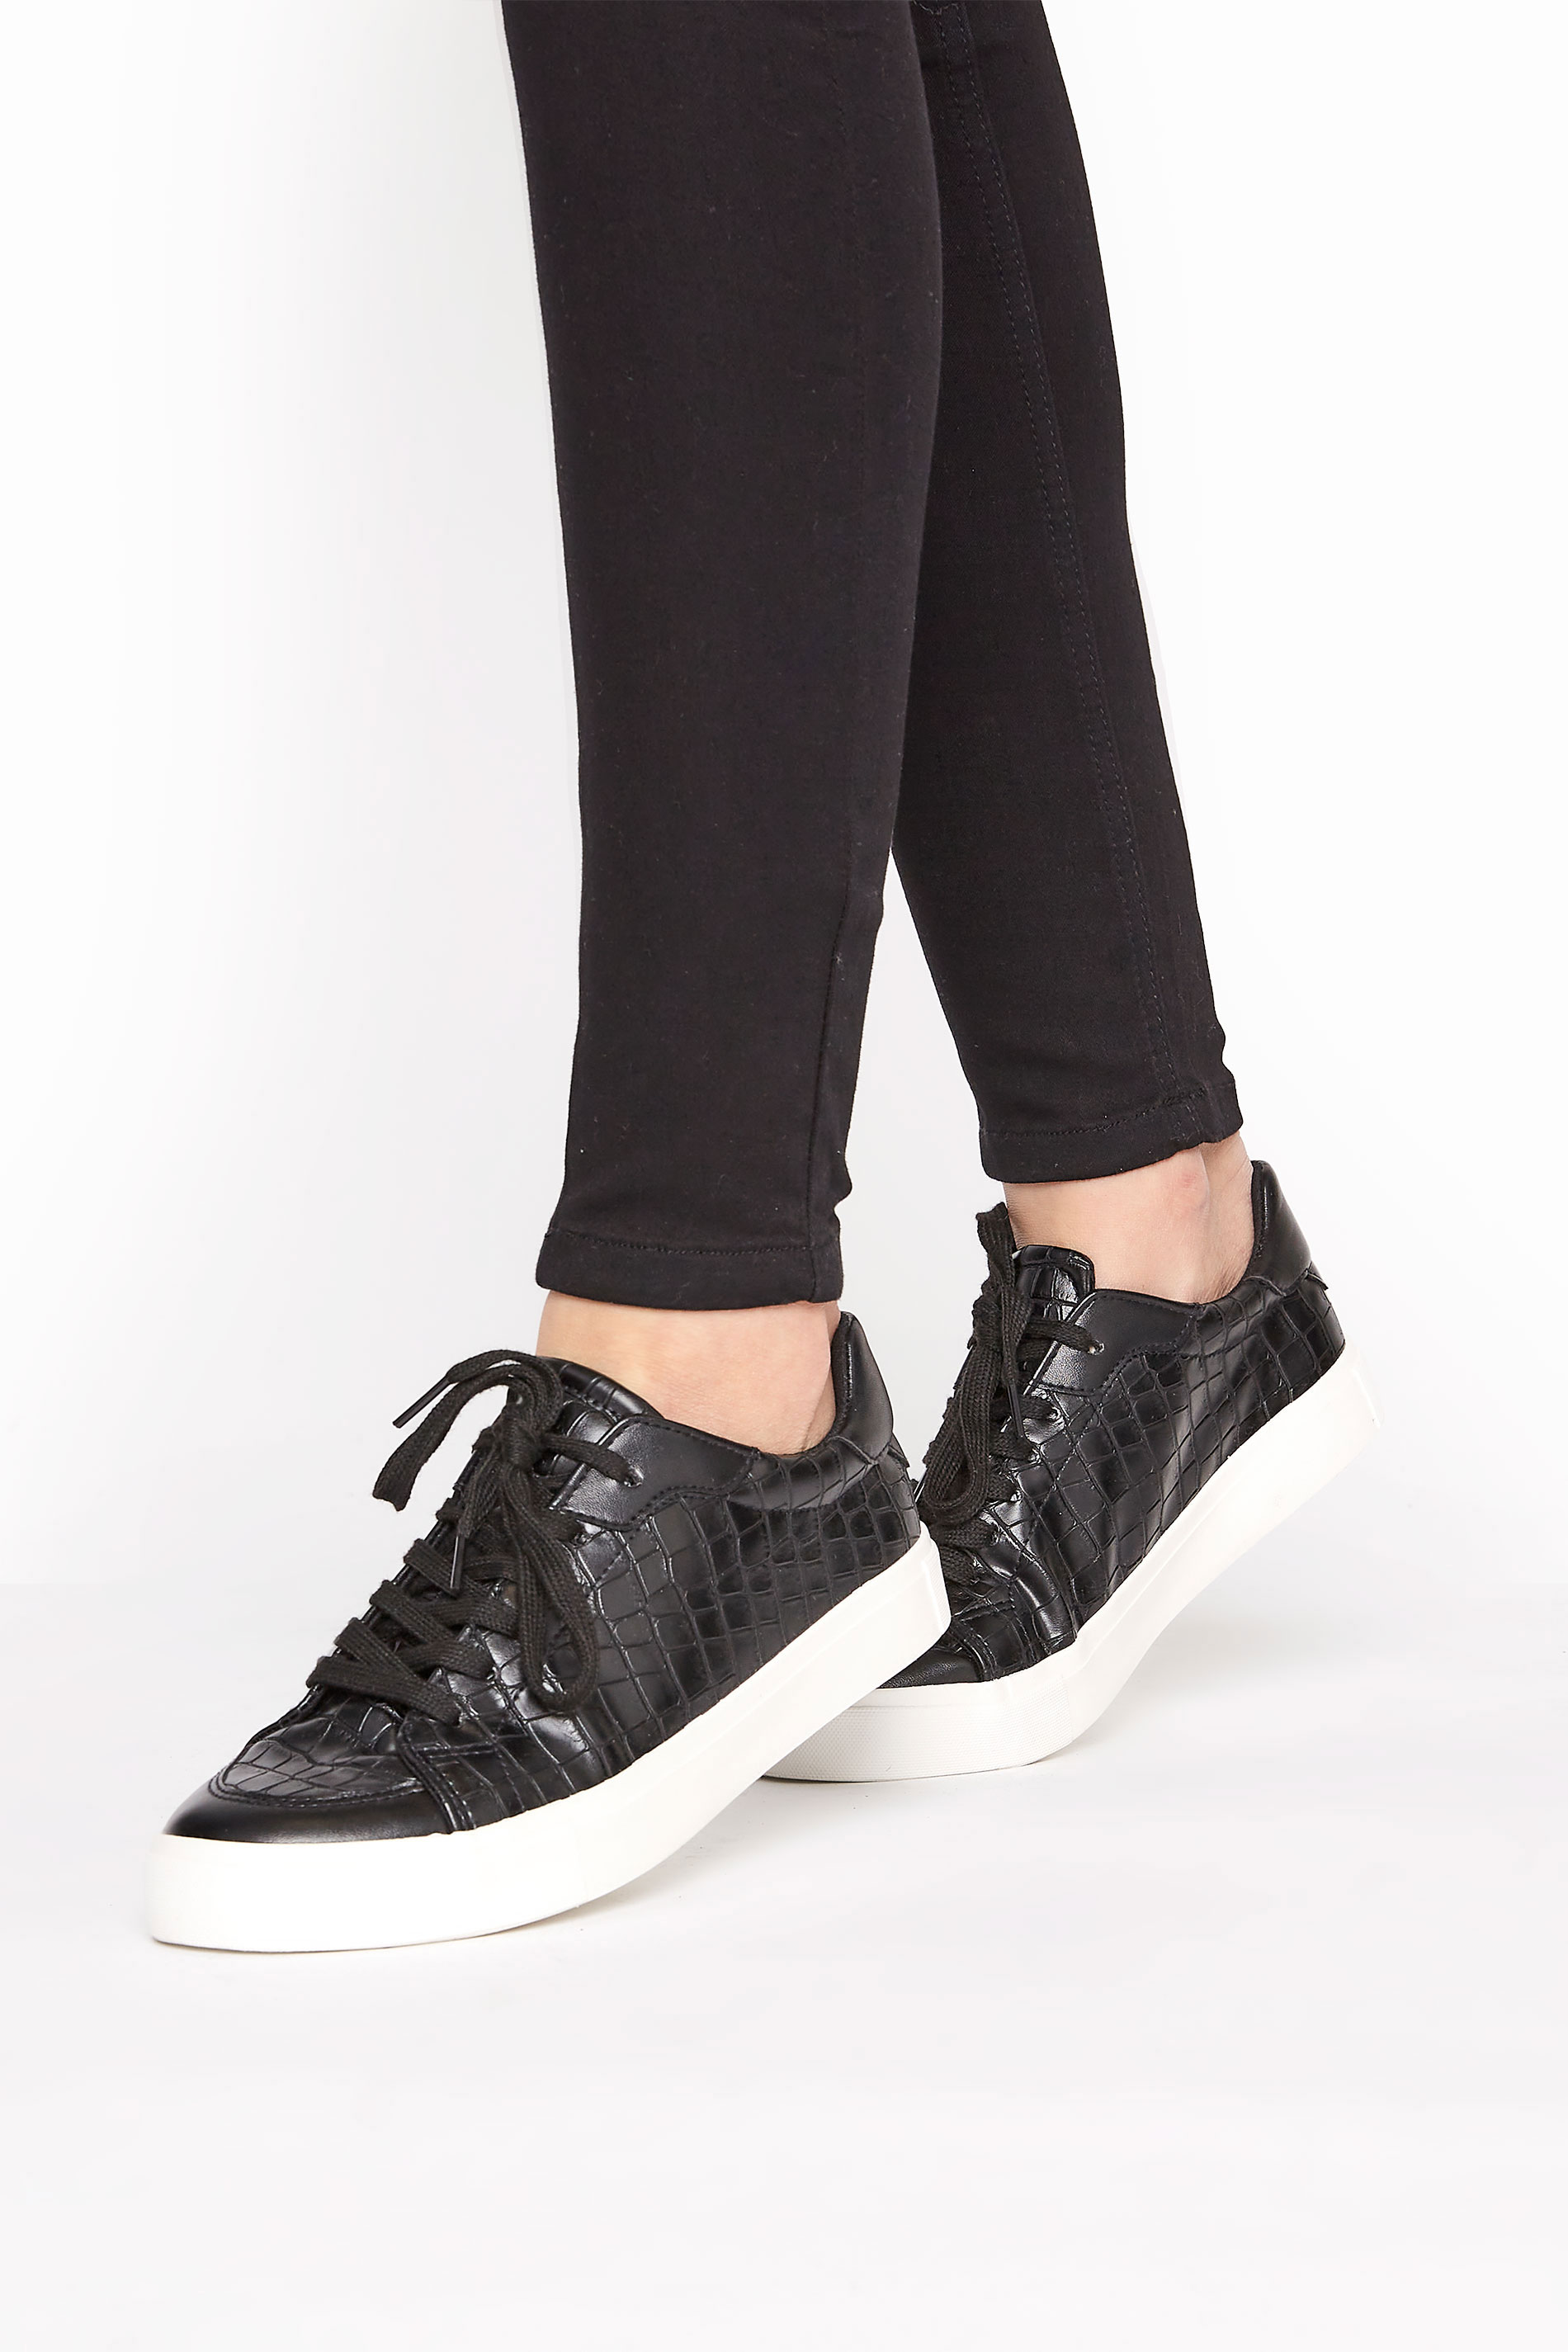 LTS Black Croc Lace Up Trainers In Standard D Fit | Long Tall Sally  1